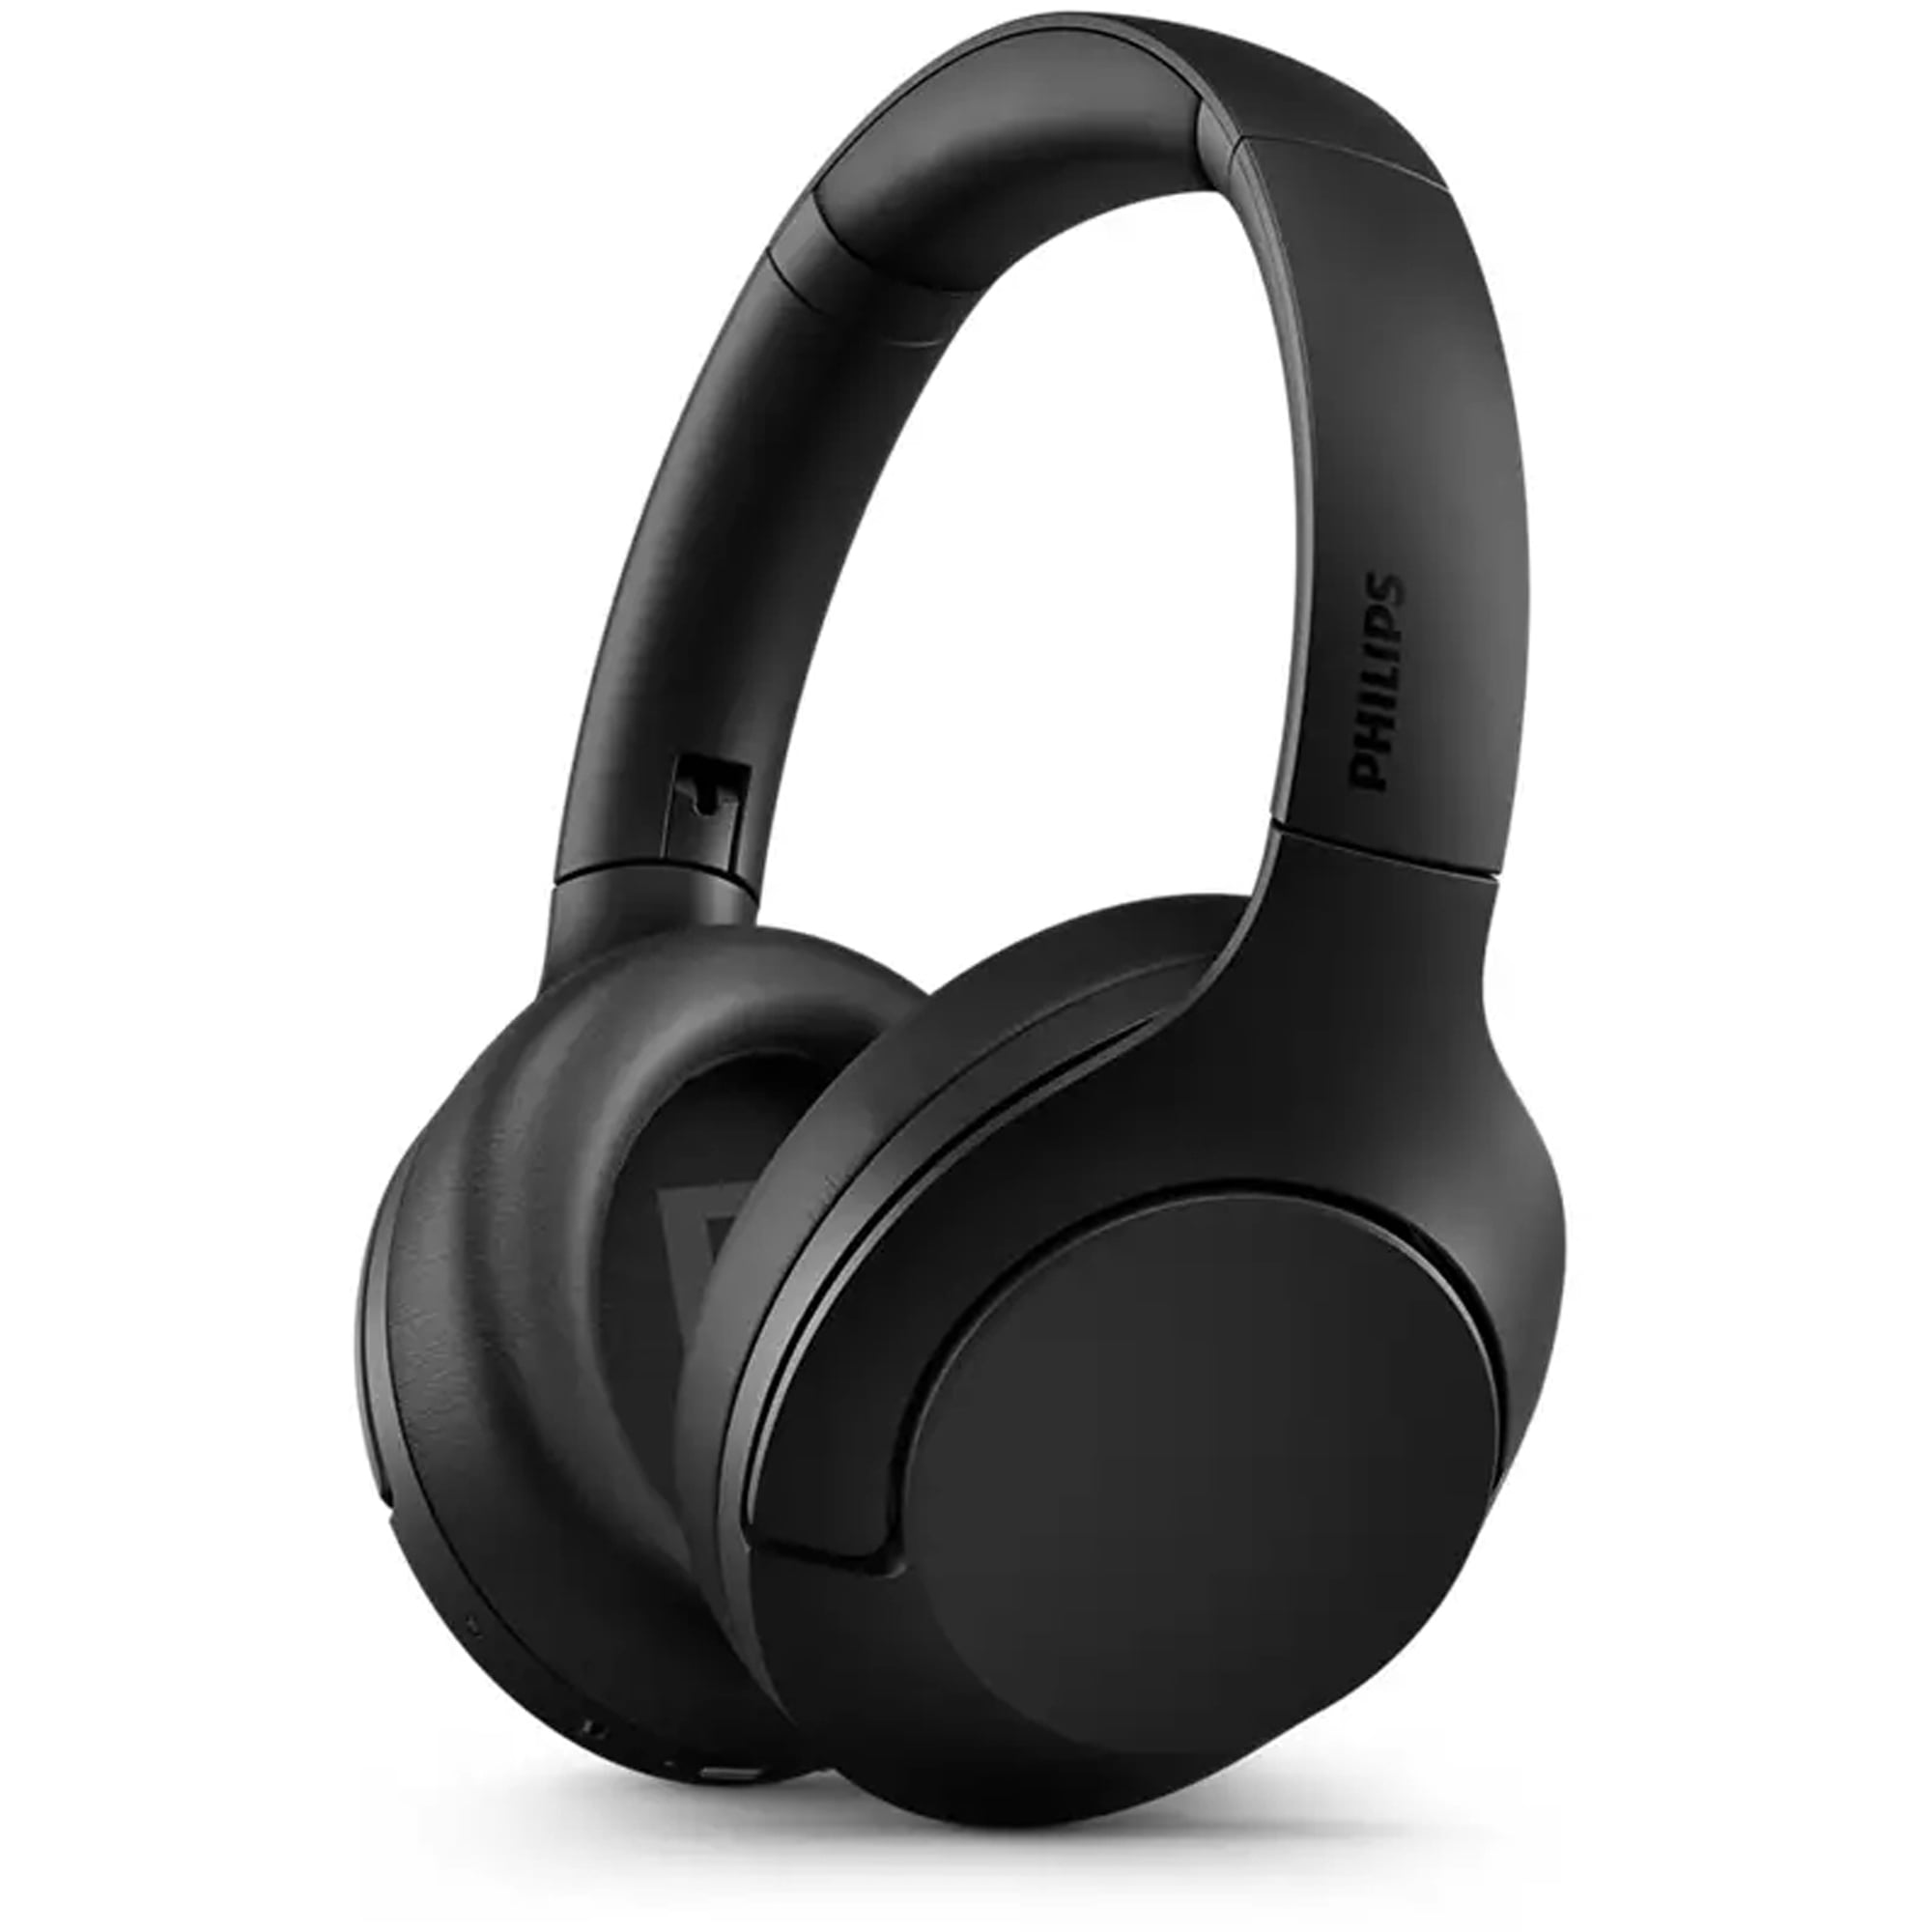 Miniature famine Monopoly Philips H8506 Wireless Headphones with ANC Pro and Multipoint Bluetooth  Connection, Black - Walmart.com